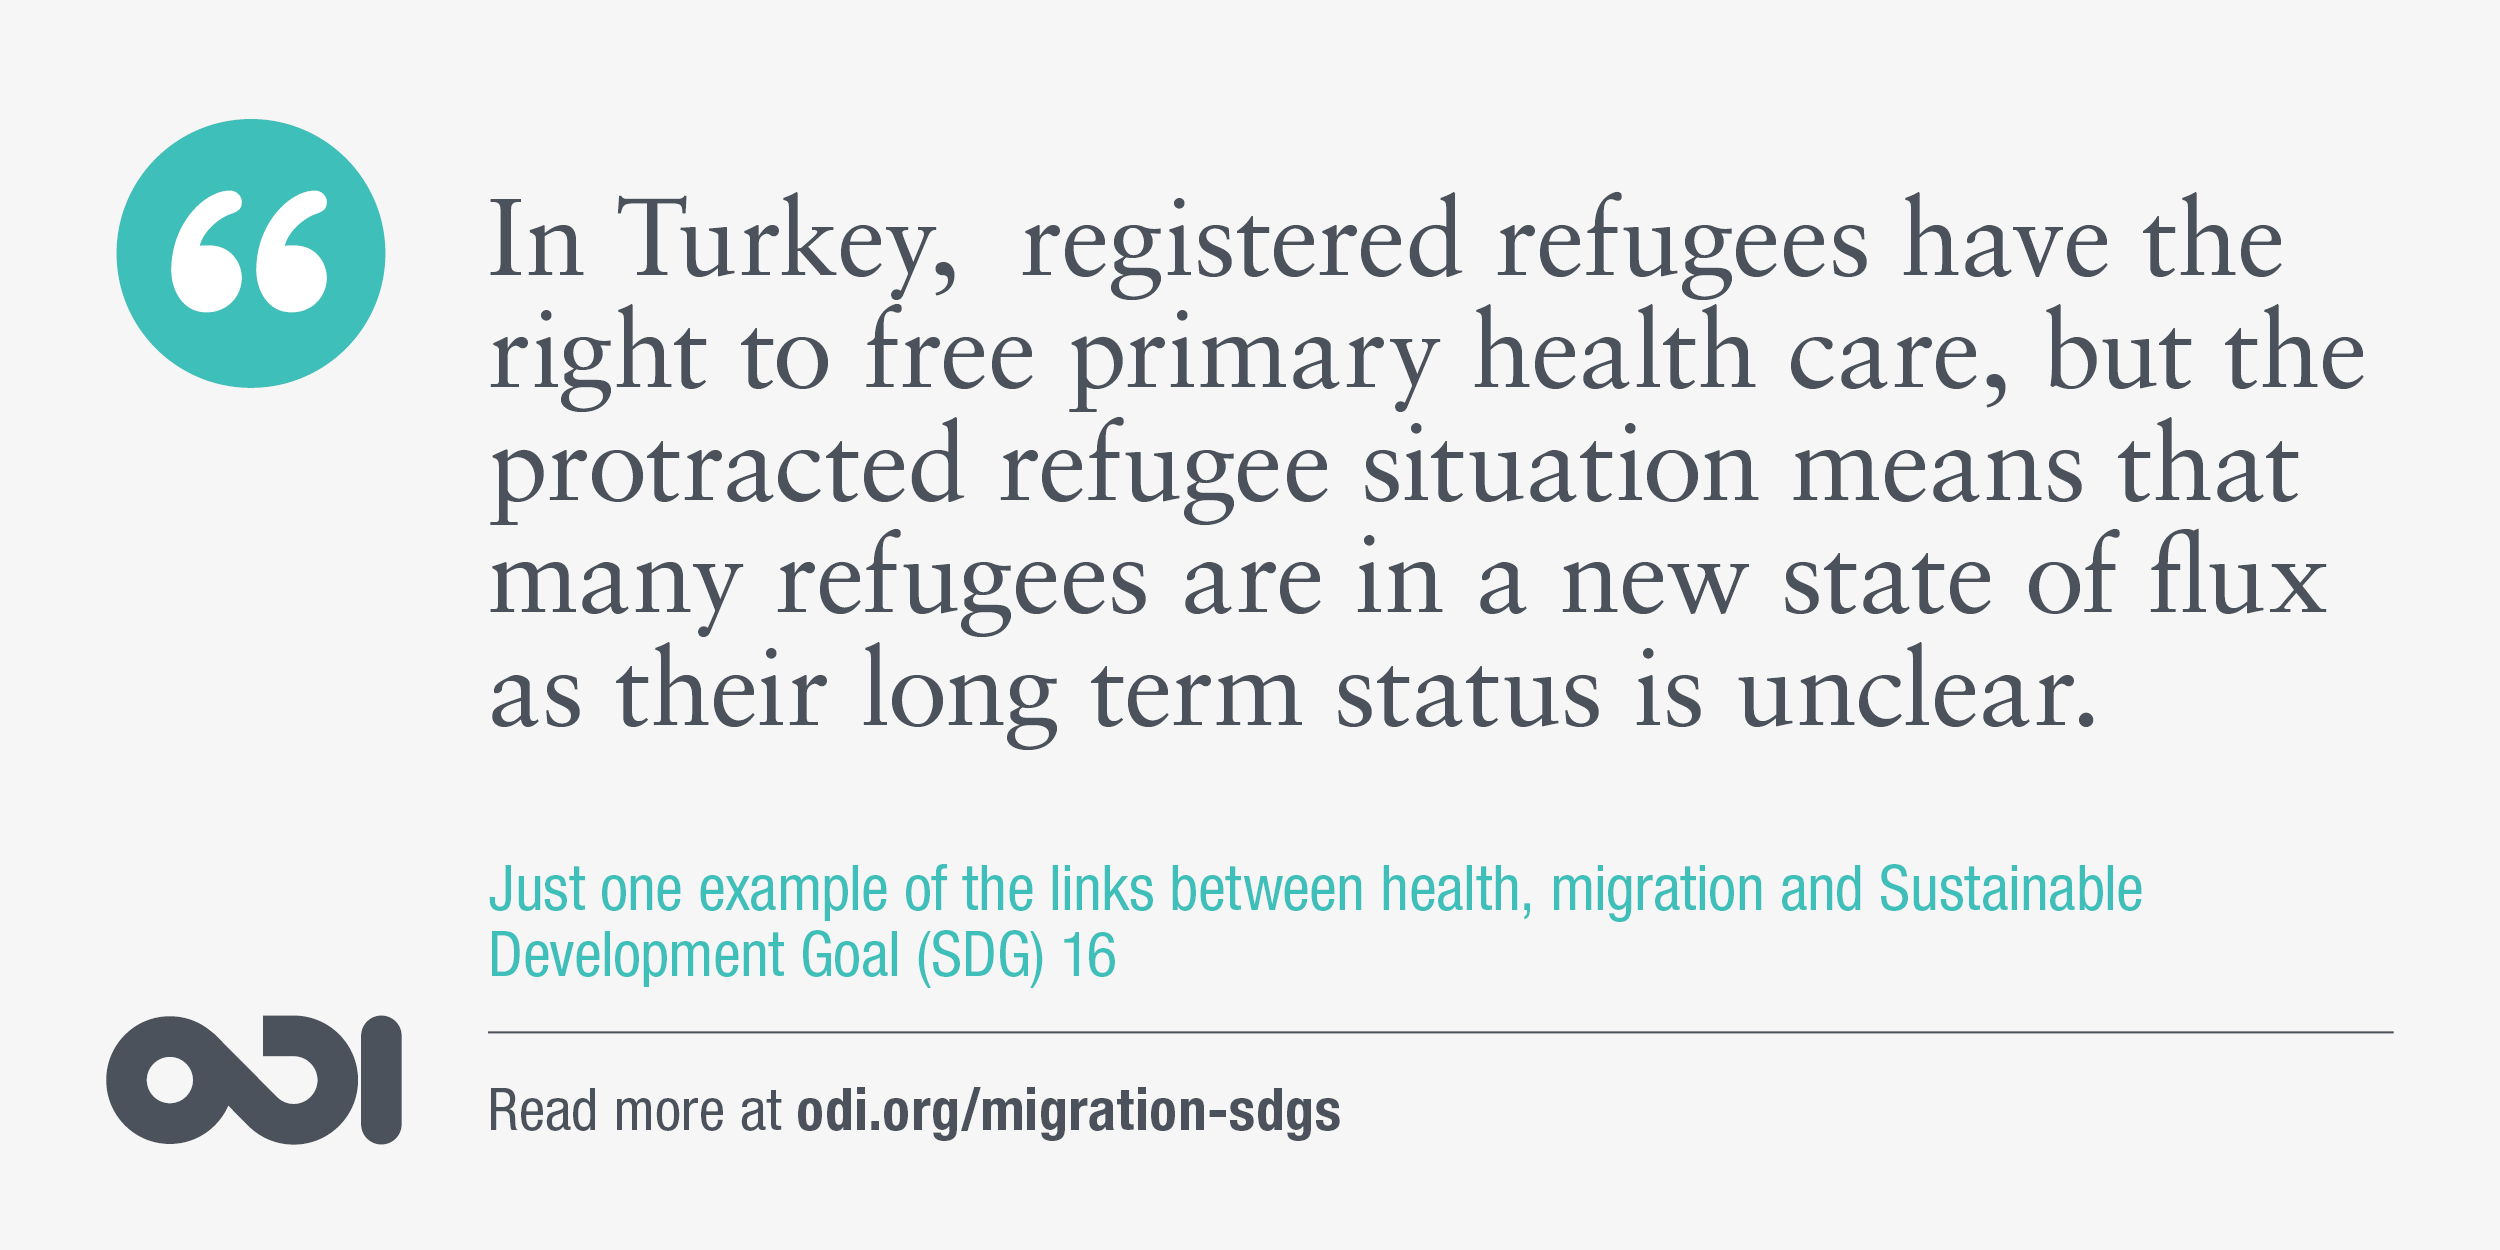 The links between health, migration and SDG 16. 